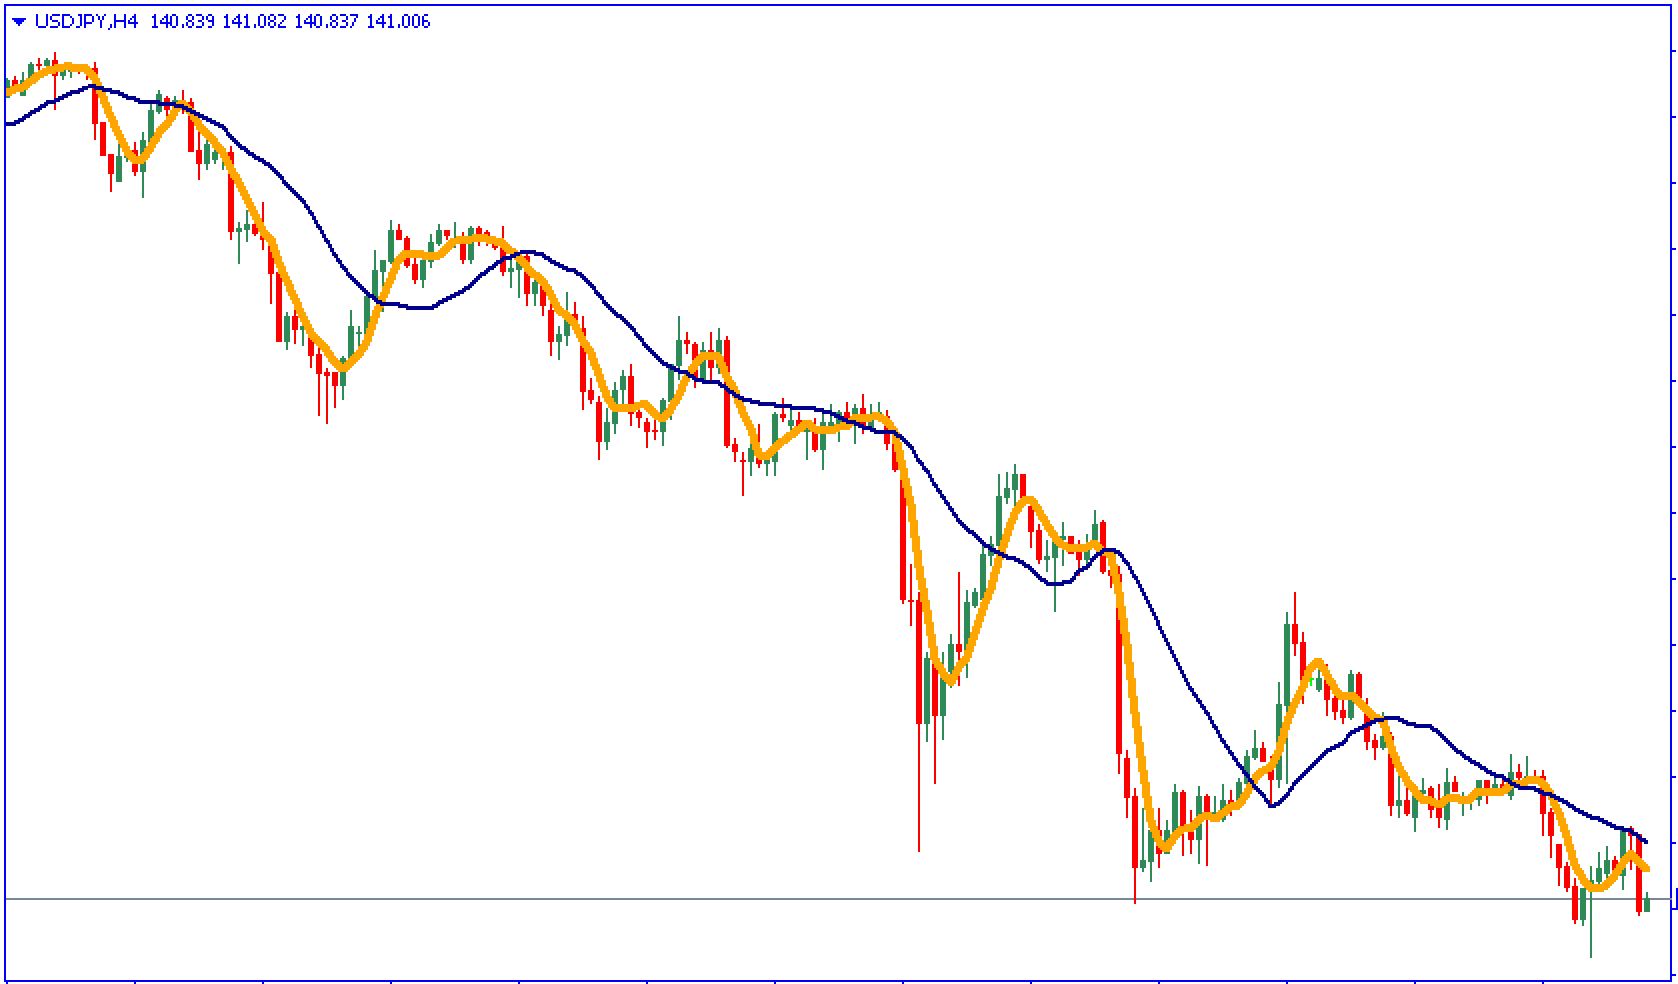 The 5 and 20 EMA Crossover Forex Trading Strategy